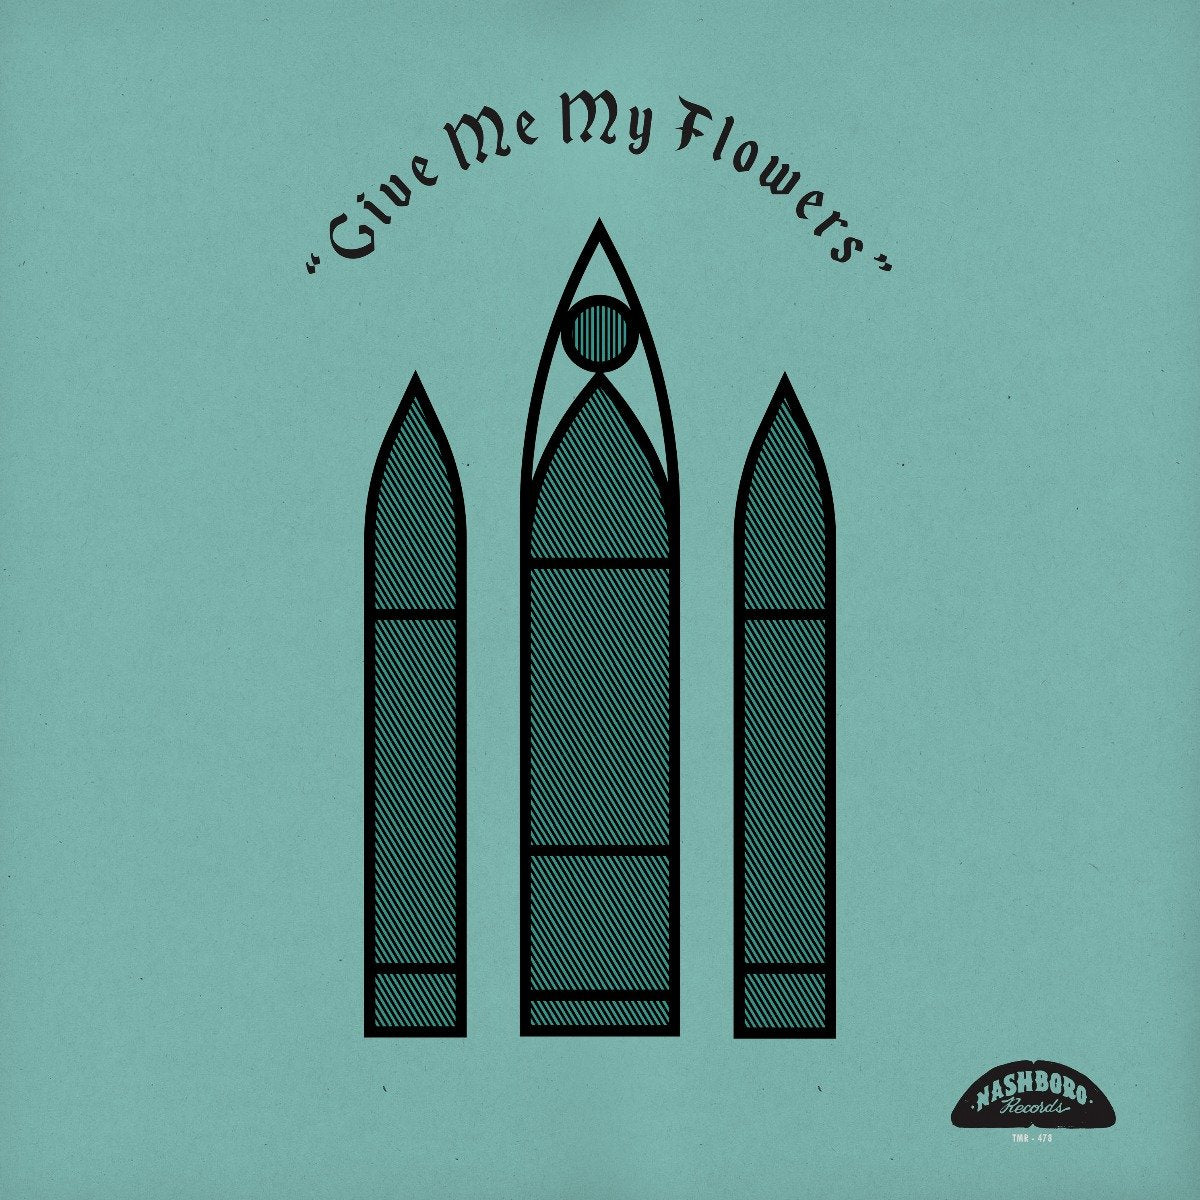 Give Me My Flowers: Powerhouse Gospel Music From the 50's and 60's on Nashboro Records